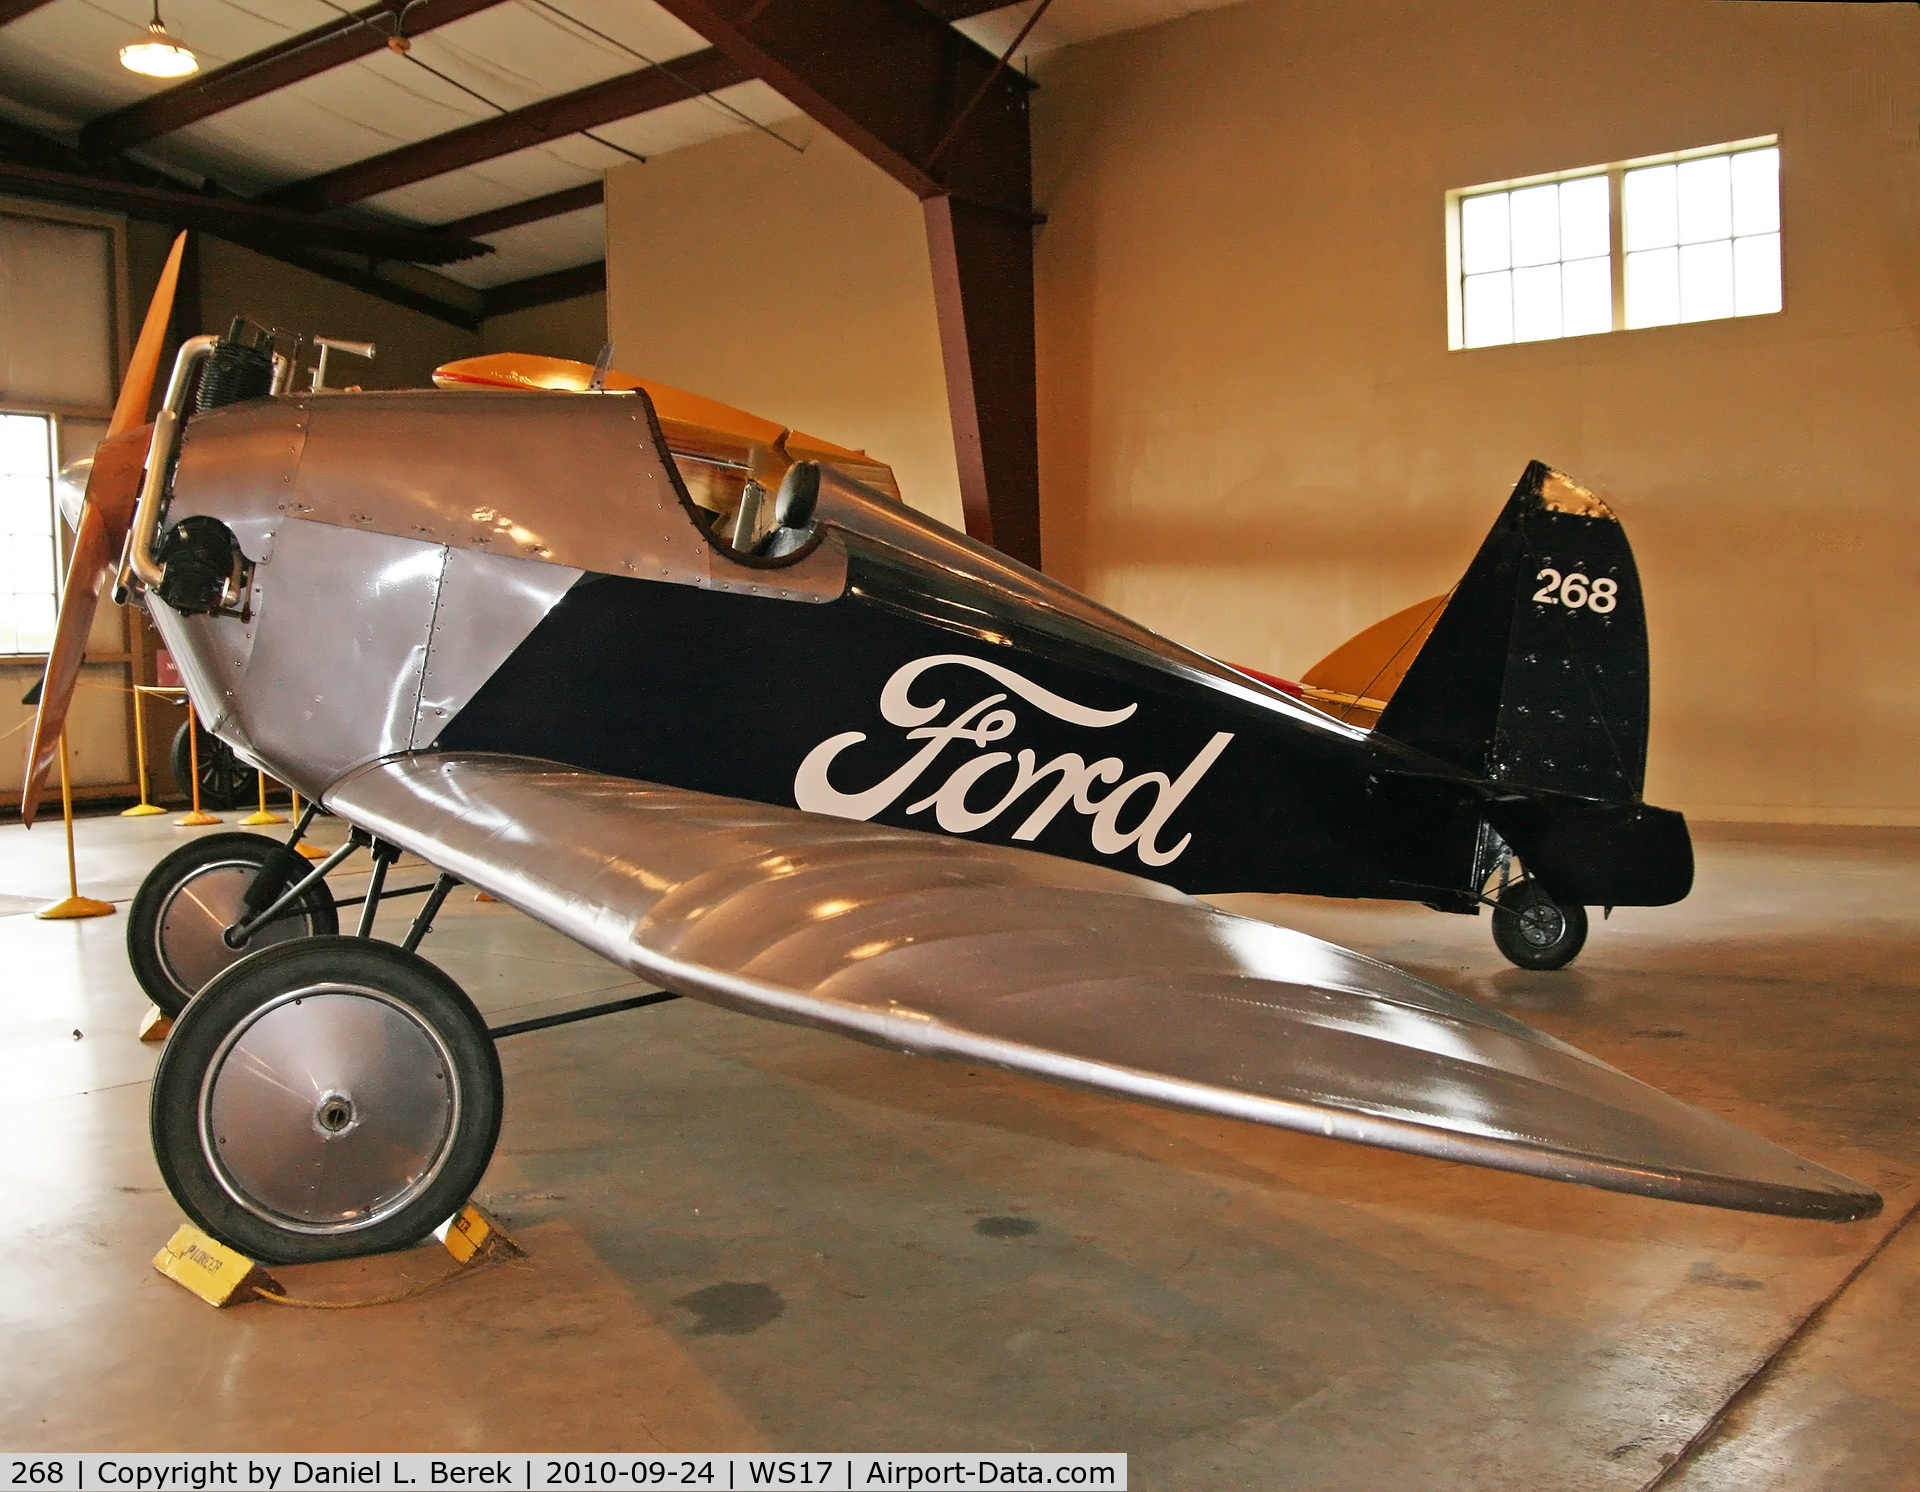 268, 1991 Ford Flivver Replica C/N 1, This aircraft is a replica of Henry Ford's 